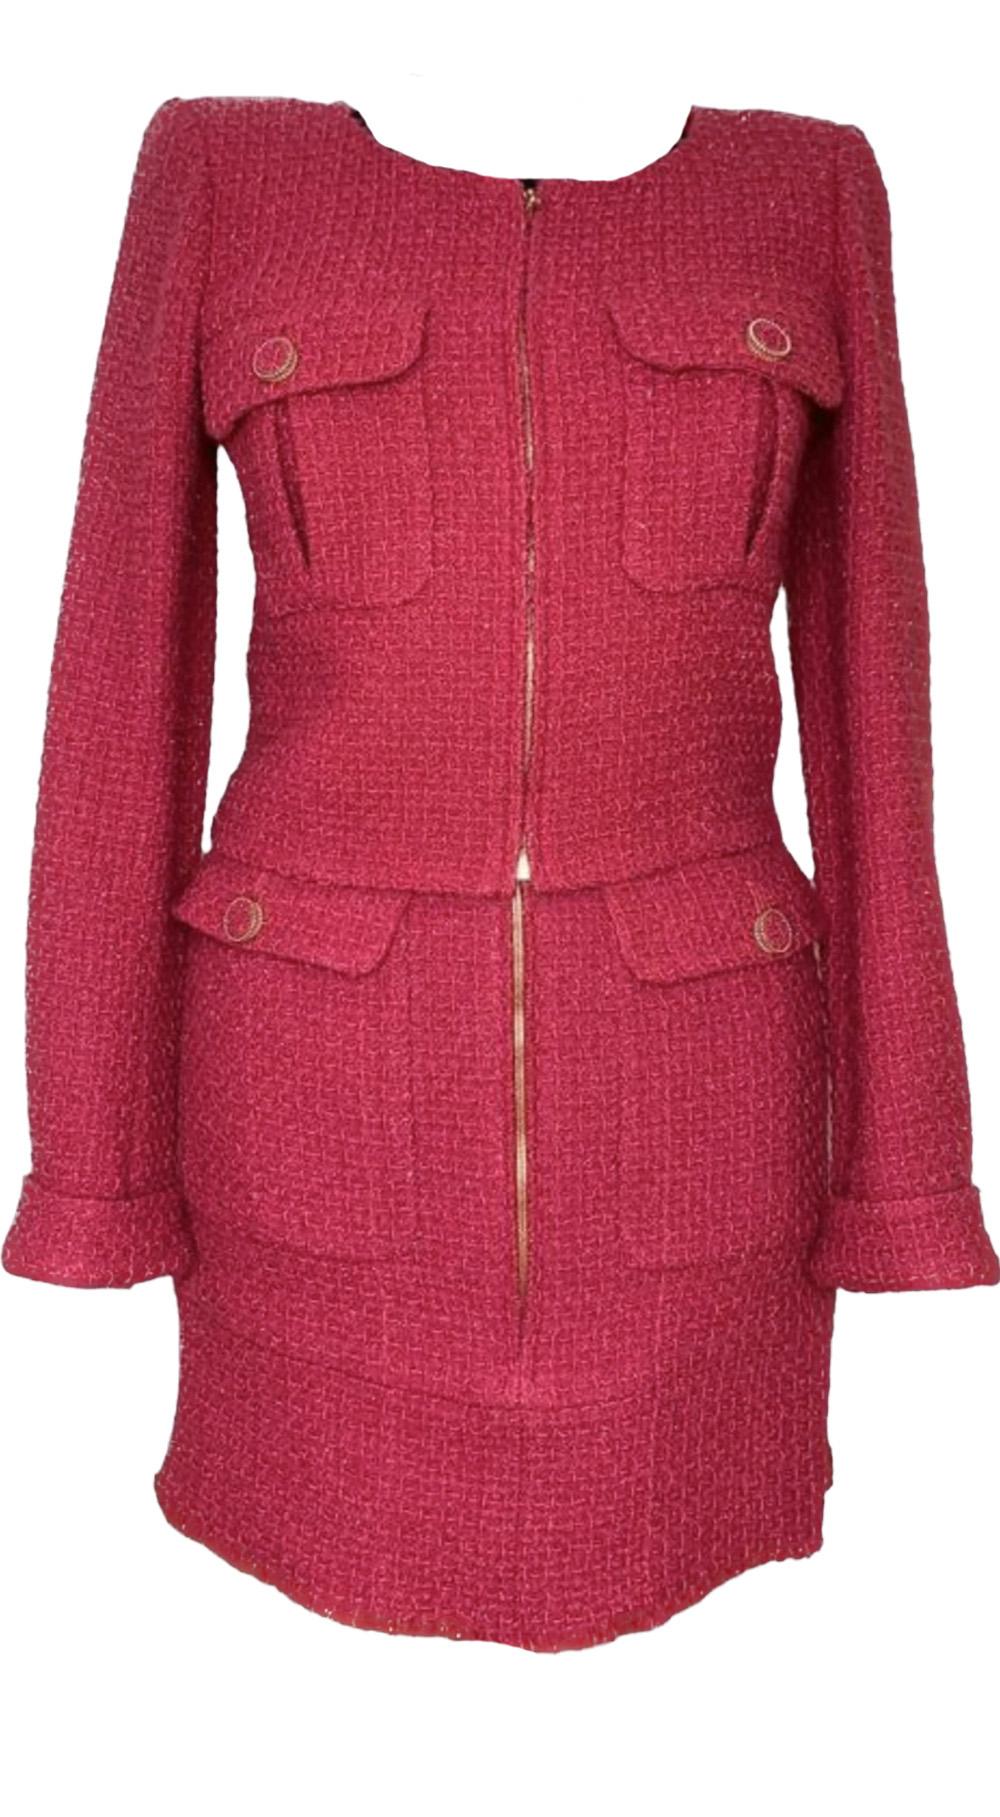 Chanel Ad Campaign Lesage Tweed Jacket and Skirt Ensemble For Sale 2